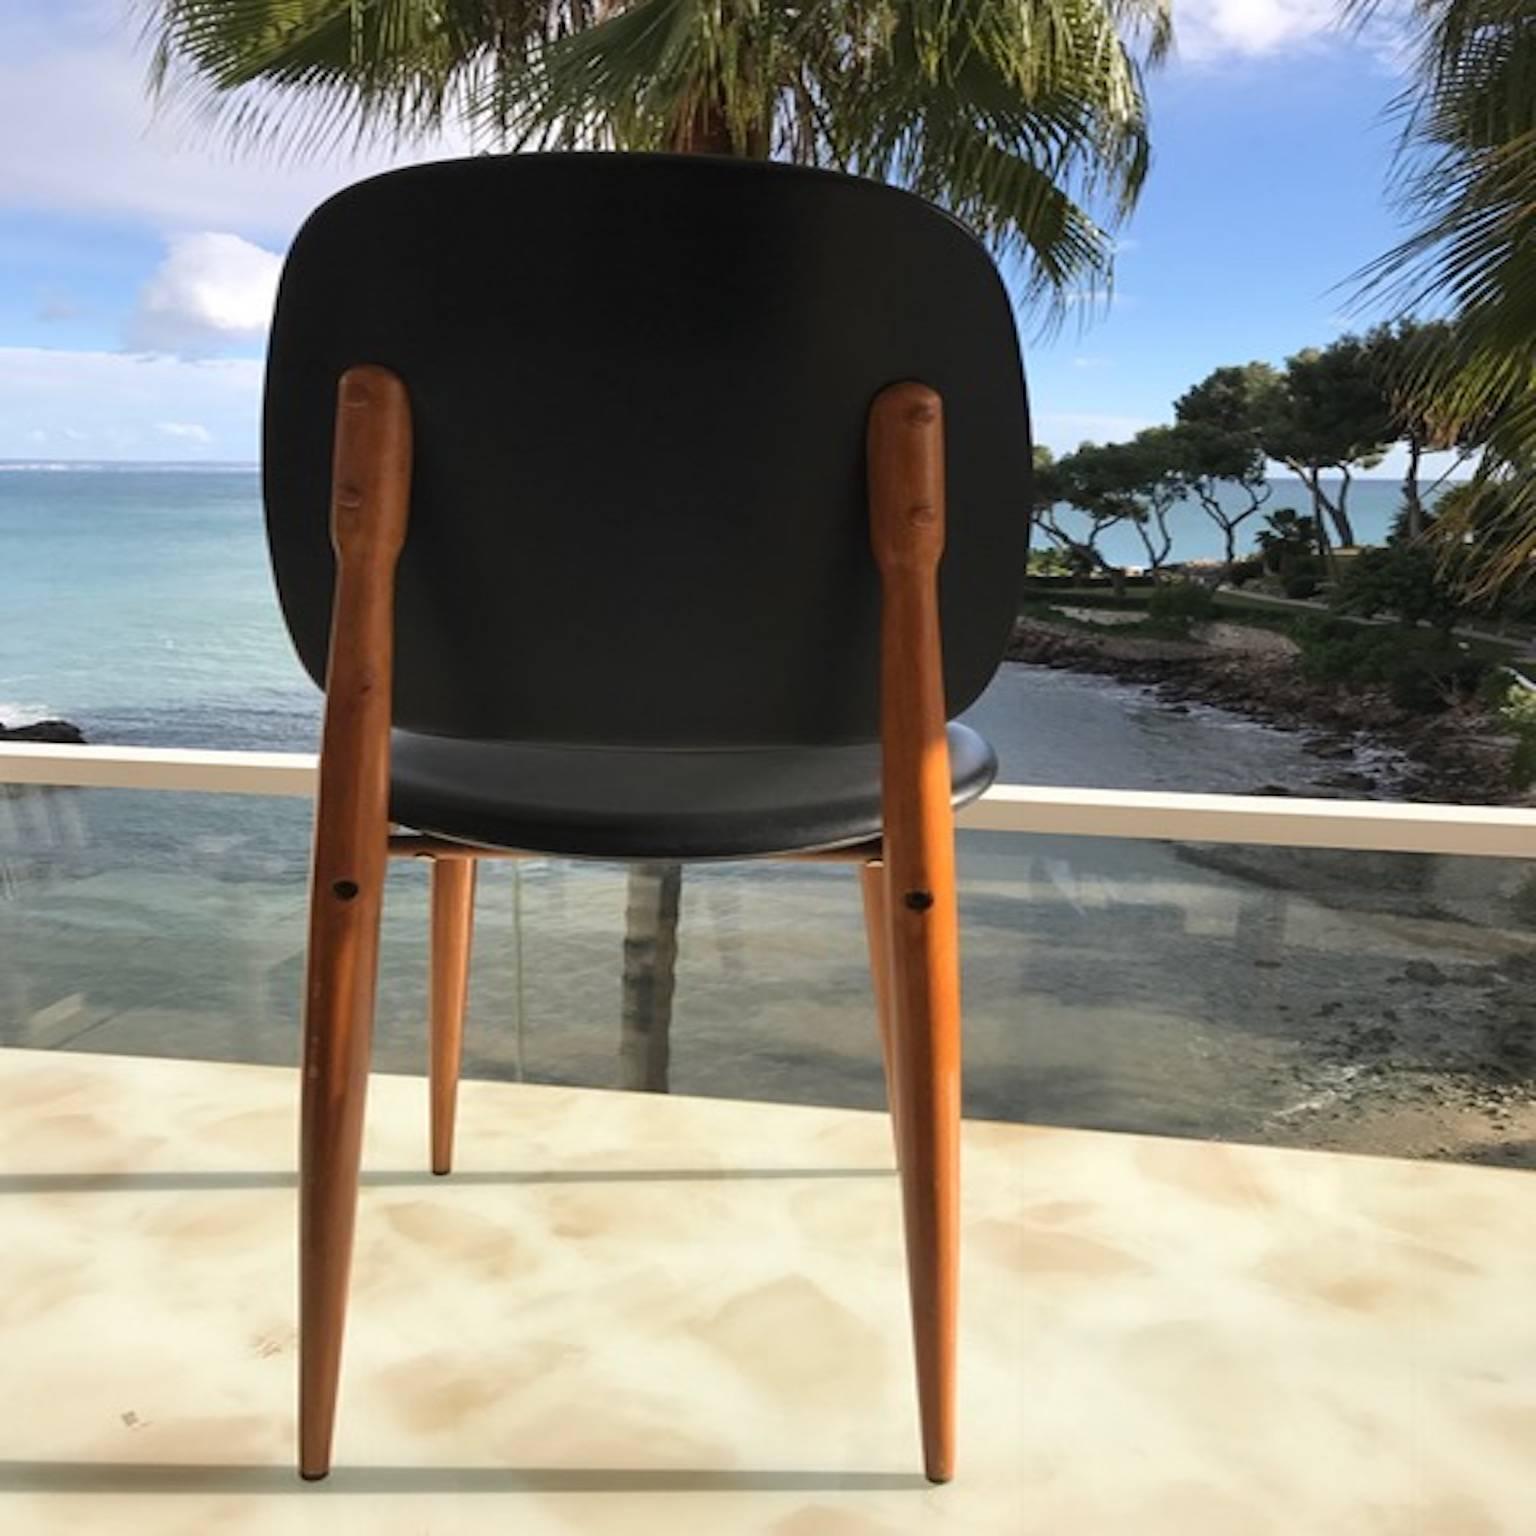 1960s Black Leather Chairs In Excellent Condition For Sale In Illetas- Mallorca, Islas Baleares